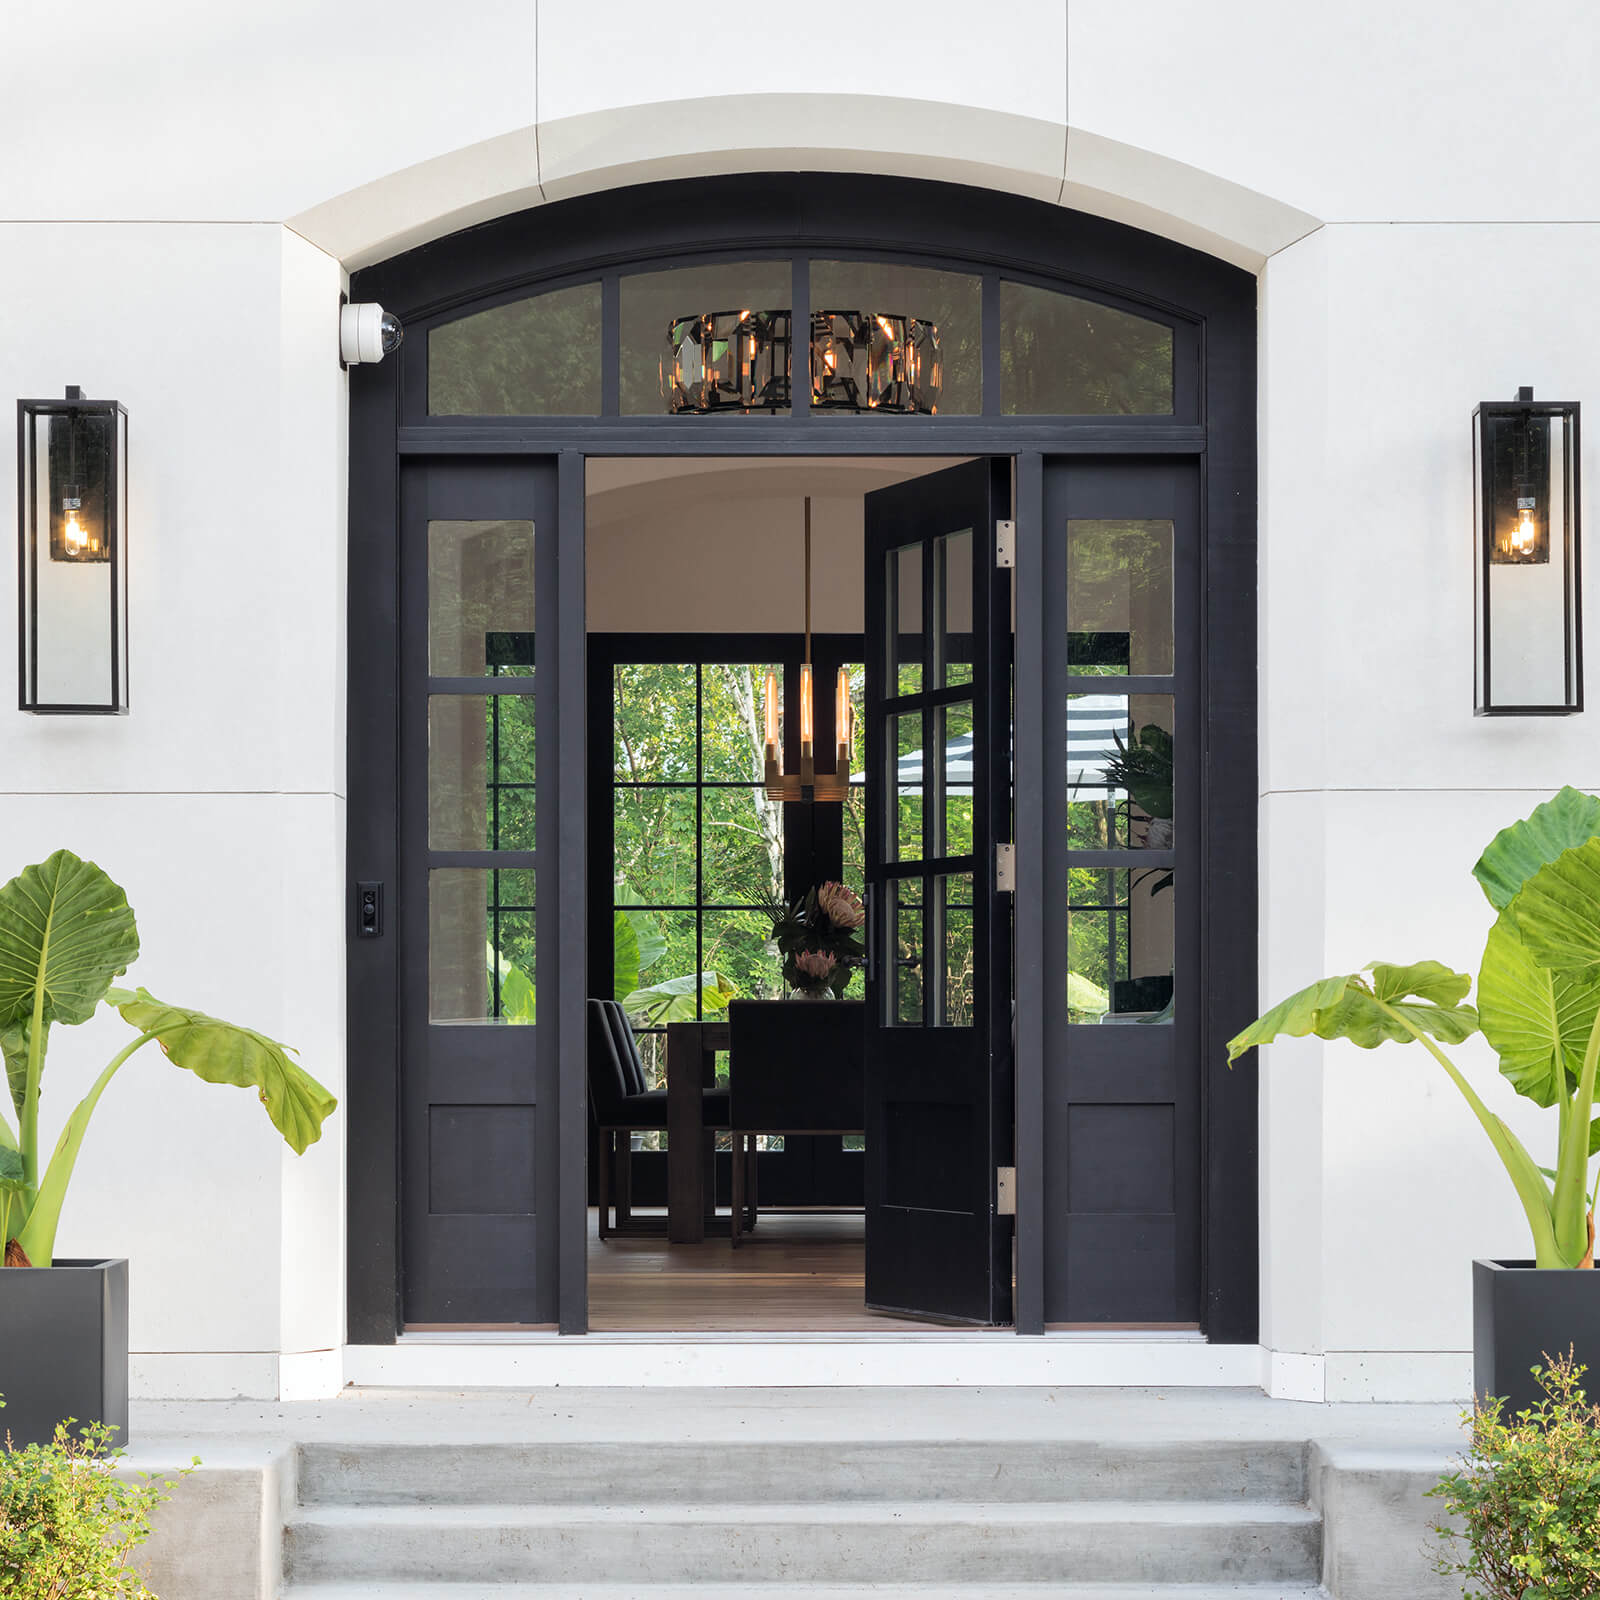 Exterior entrance of traditional style home with Marvin Signature Ultimate Inswing French Door